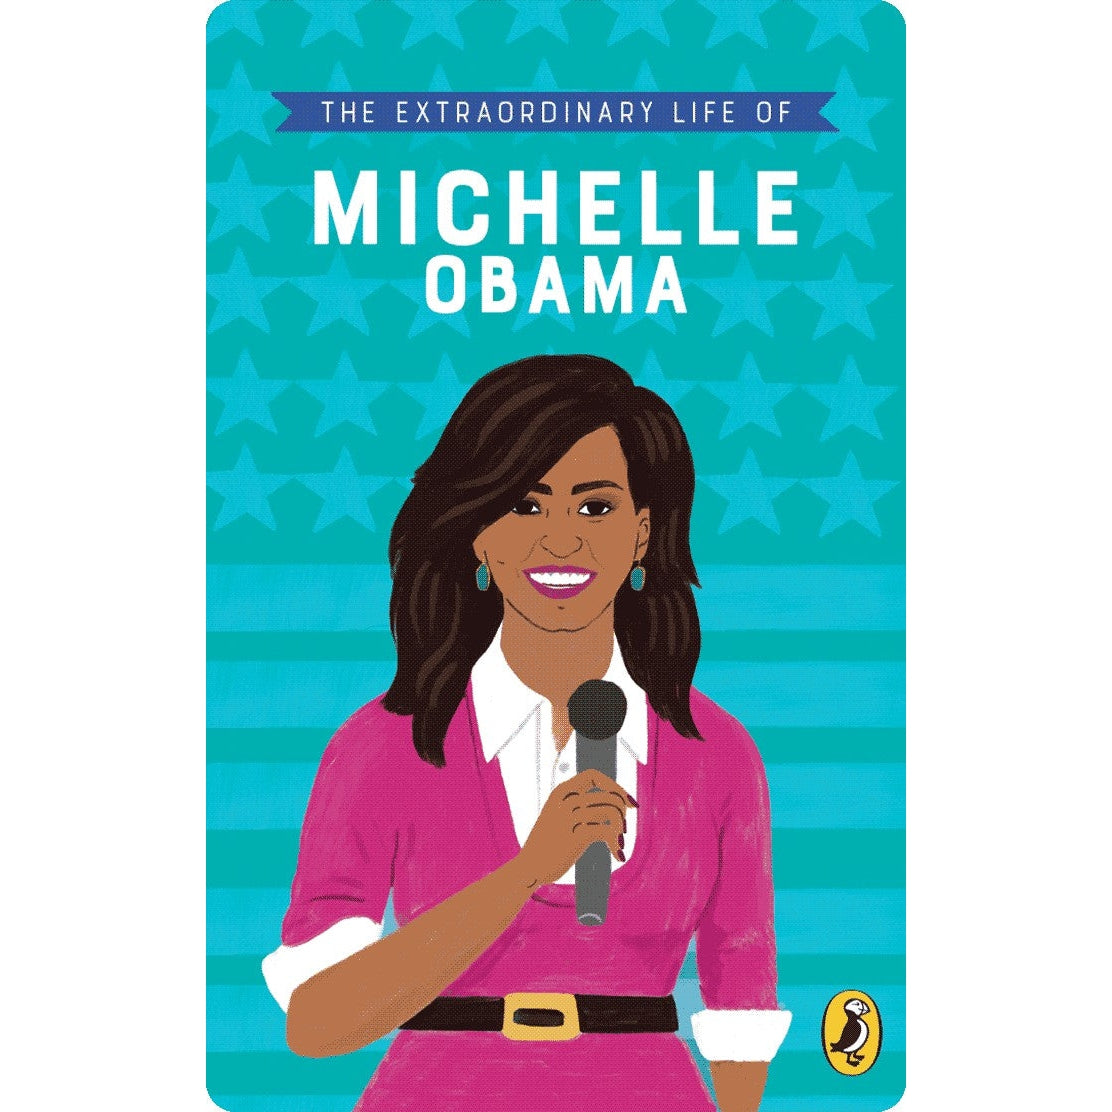 Yoto Card - The Extraordinary Life of Michelle Obama - Child Friendly Audio Story Card for the Yoto Player